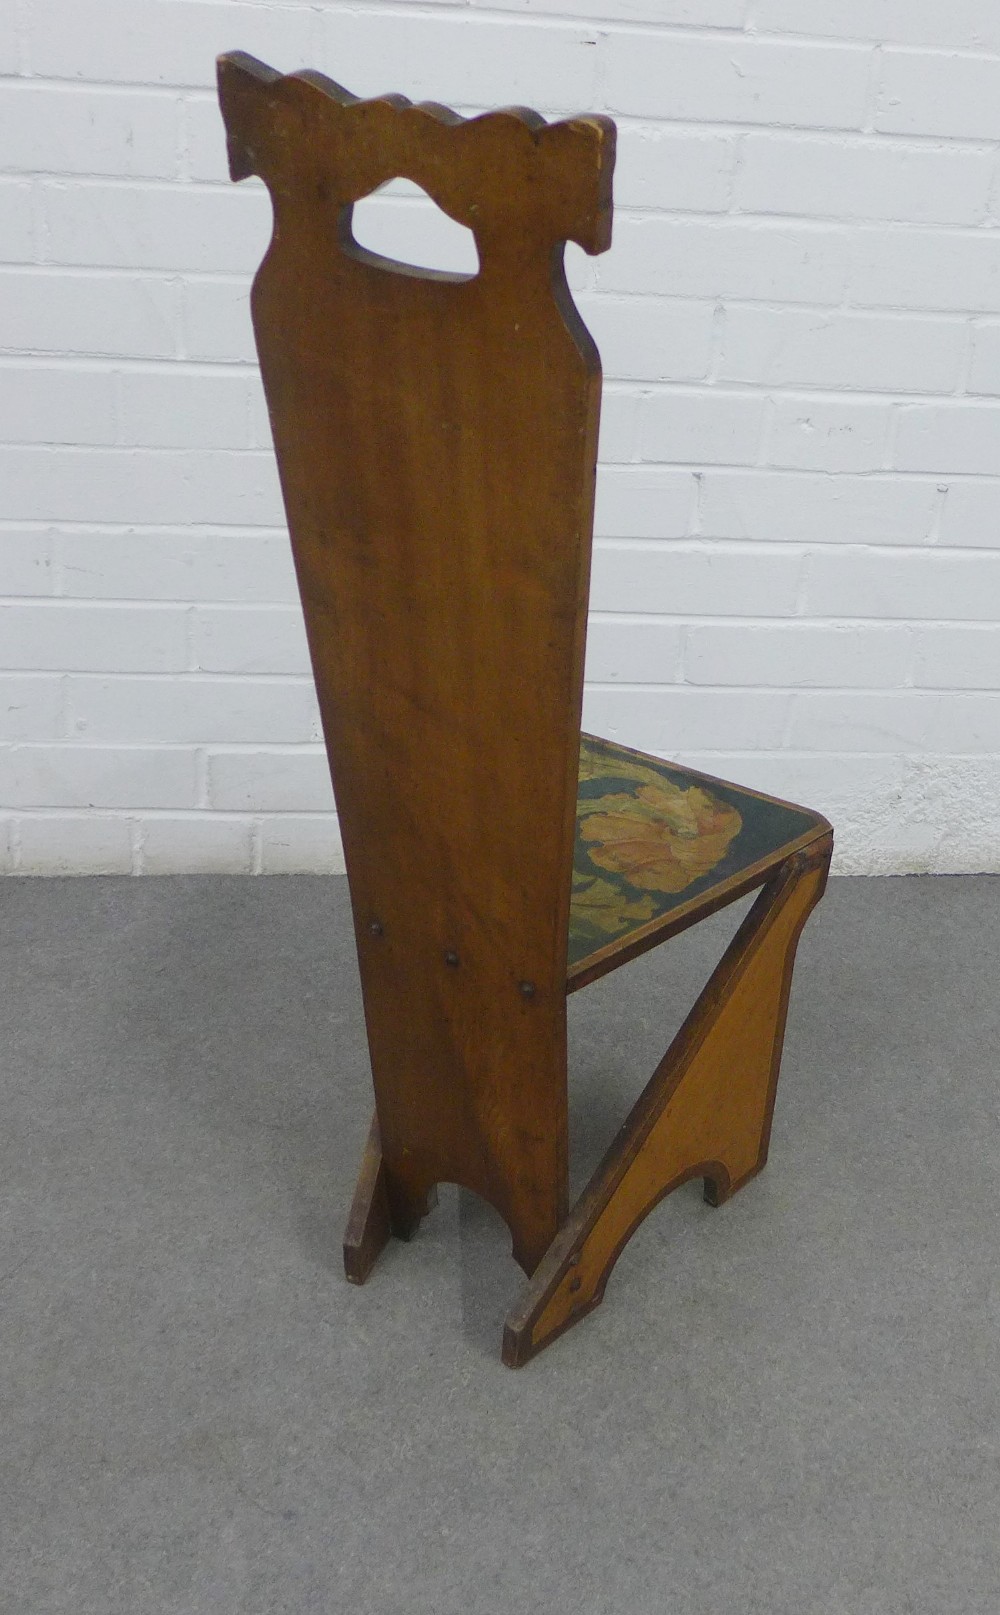 Glasgow style penwork Mermaid pattern chair, with sloped back and shaped supports, 86 x 31cm - Image 3 of 3